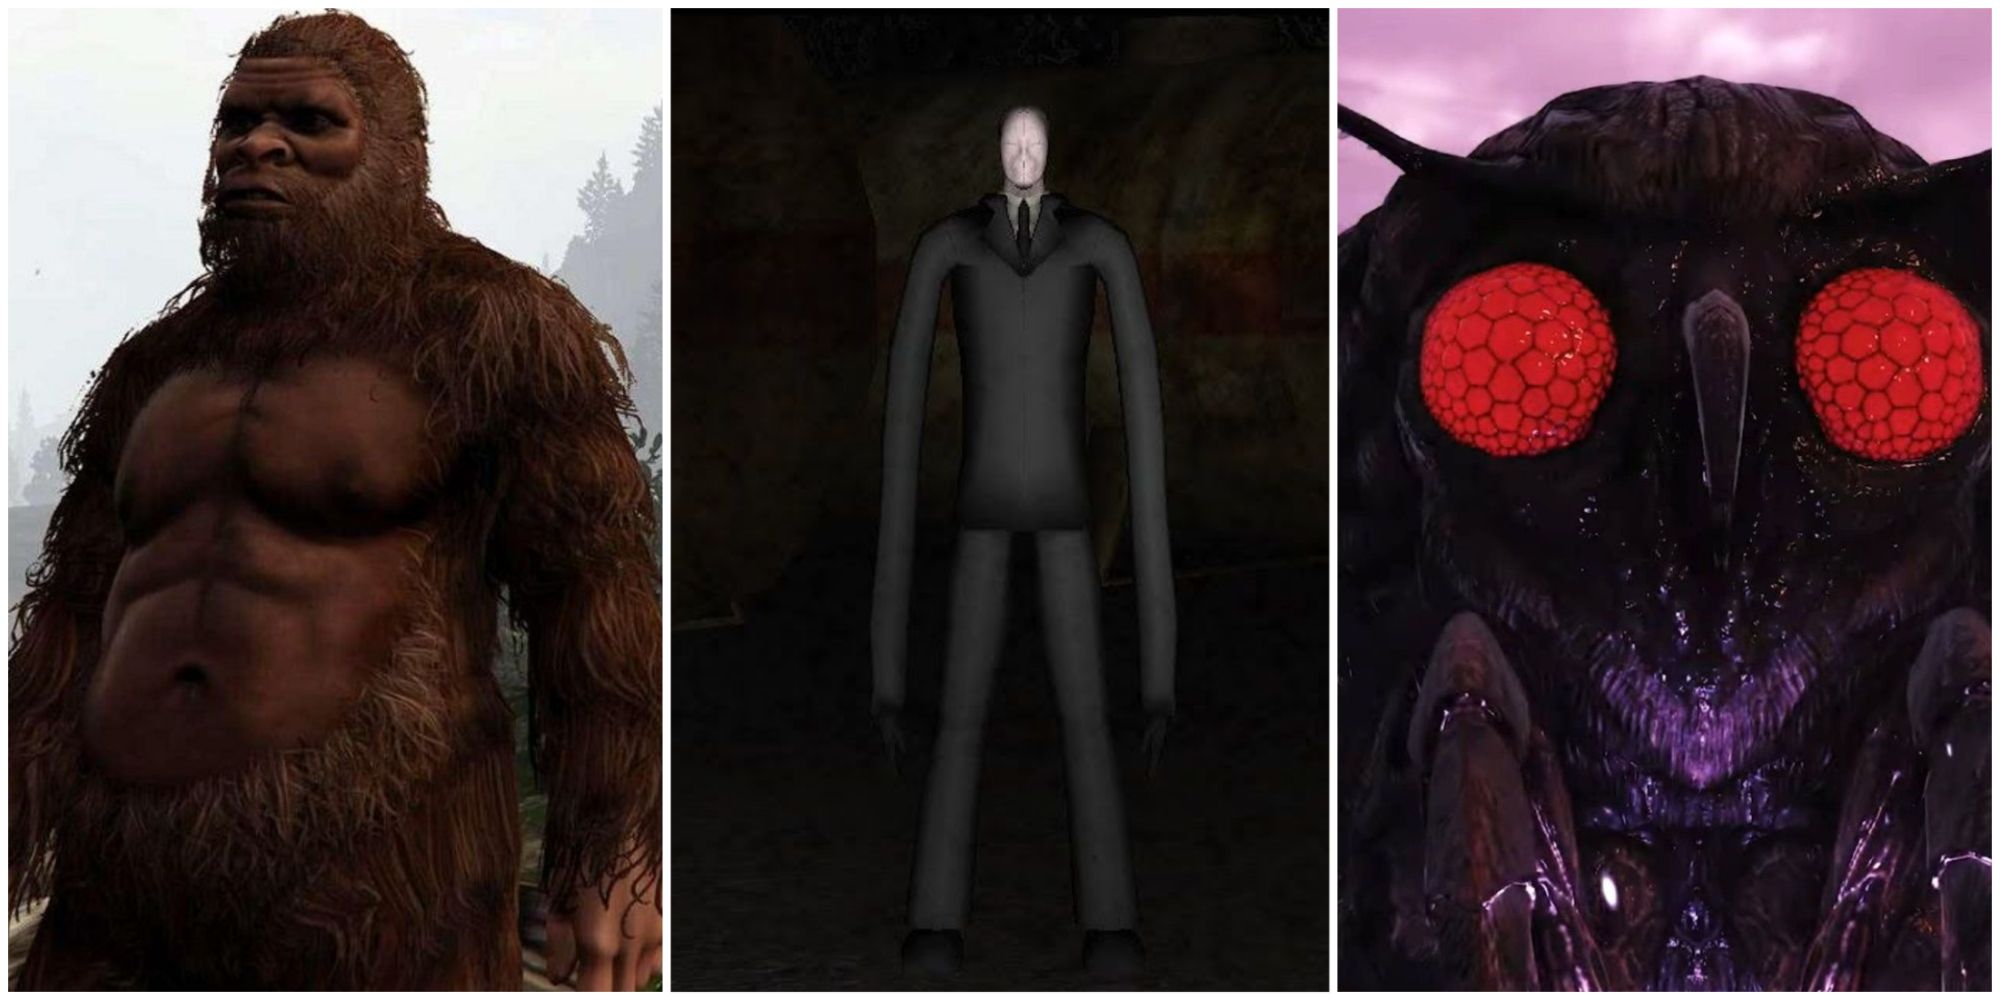 Bigfoot in a suit from GTA, Slender Man in a Slender Man horror game standing upright against a dark background, Mothman with glowing red eyes up close from Fallout 76